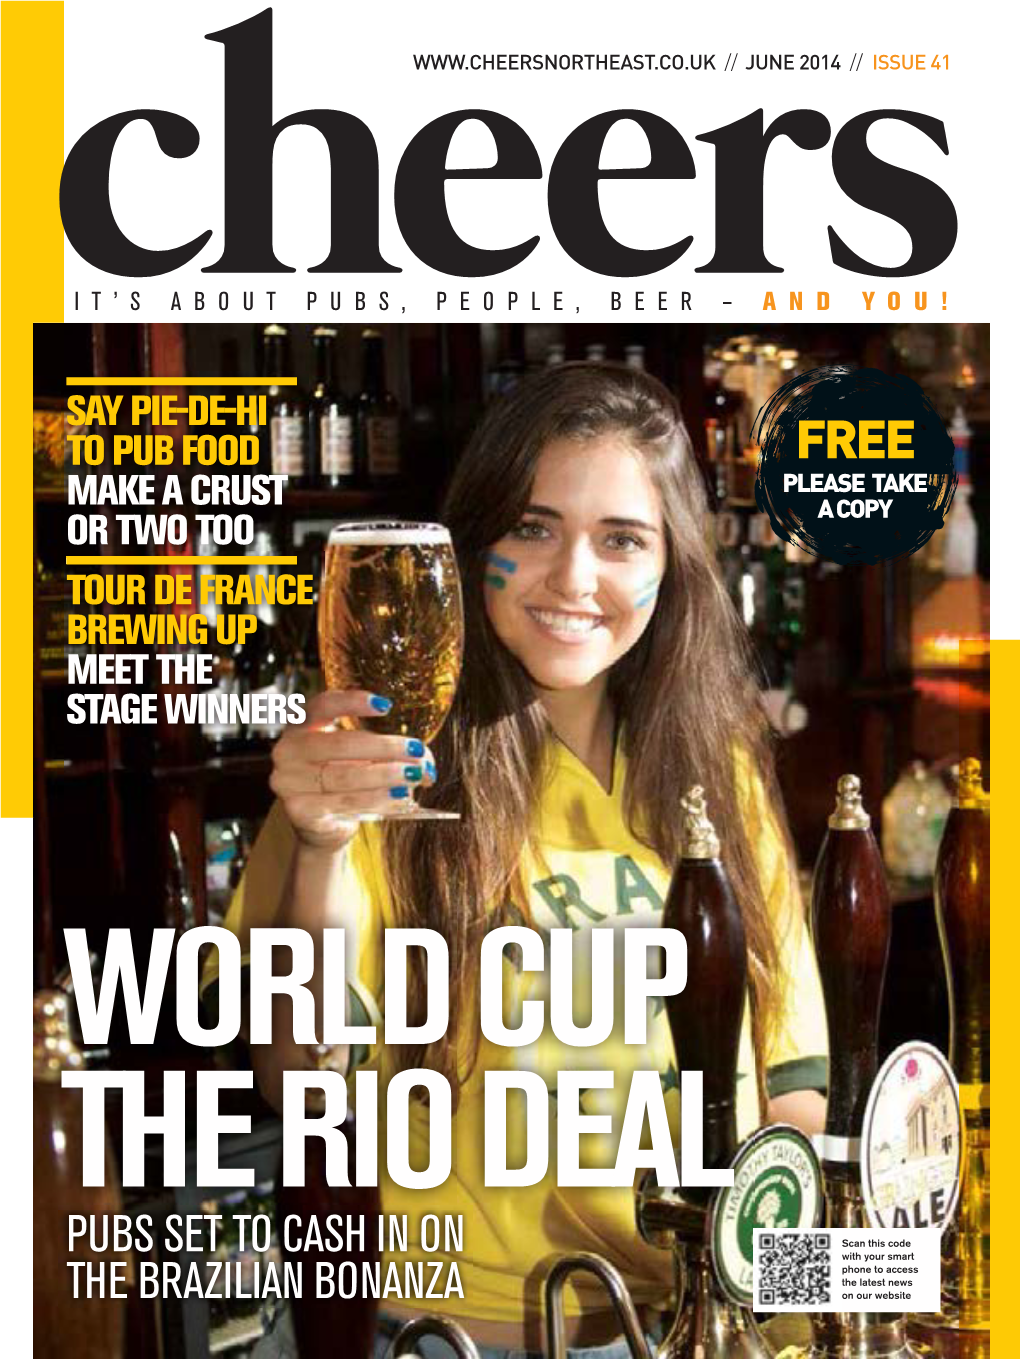 PUBS, PEOPLE, BEER – and YOU! Cheers SAY PIE-DE-HI to PUB FOOD FREE PLEASE TAKE MAKE a CRUST a COPY OR TWO TOO TOUR DE FRANCE BREWING up MEET the STAGE WINNERS